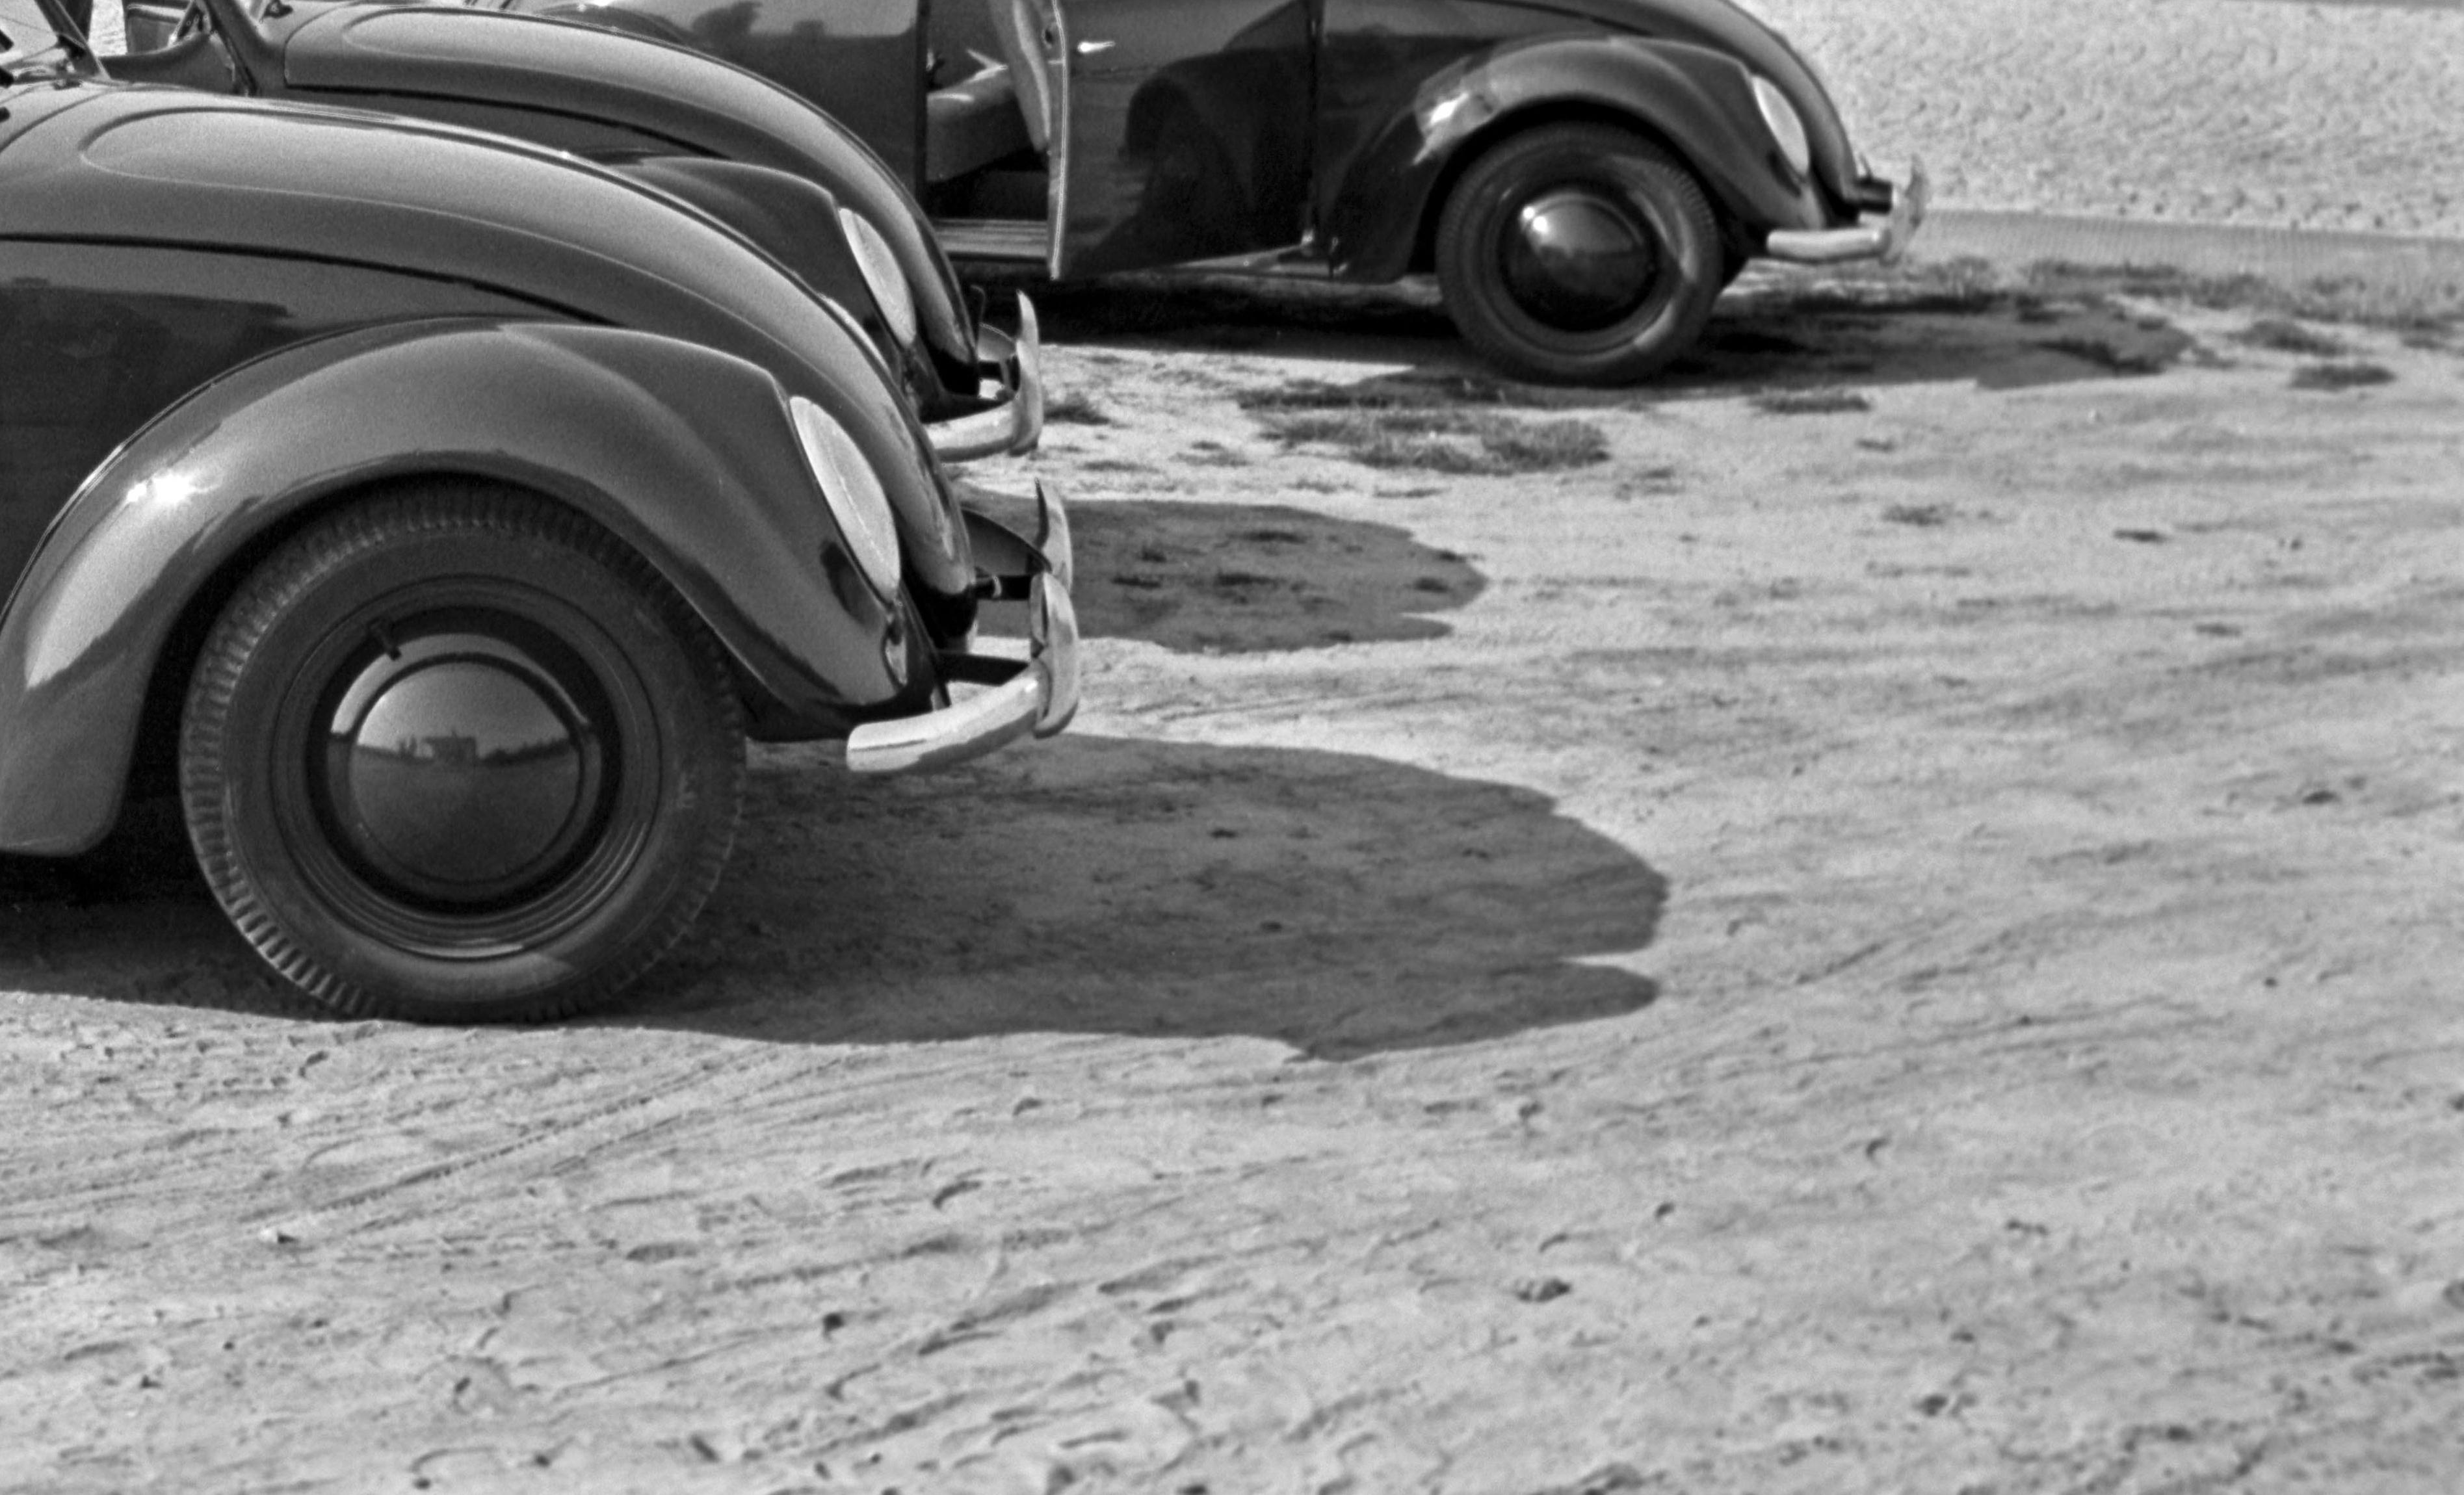 Three models of the Volkswagen beetle parking, Germany 1938 Printed Later  - Photograph by Henning Nolte